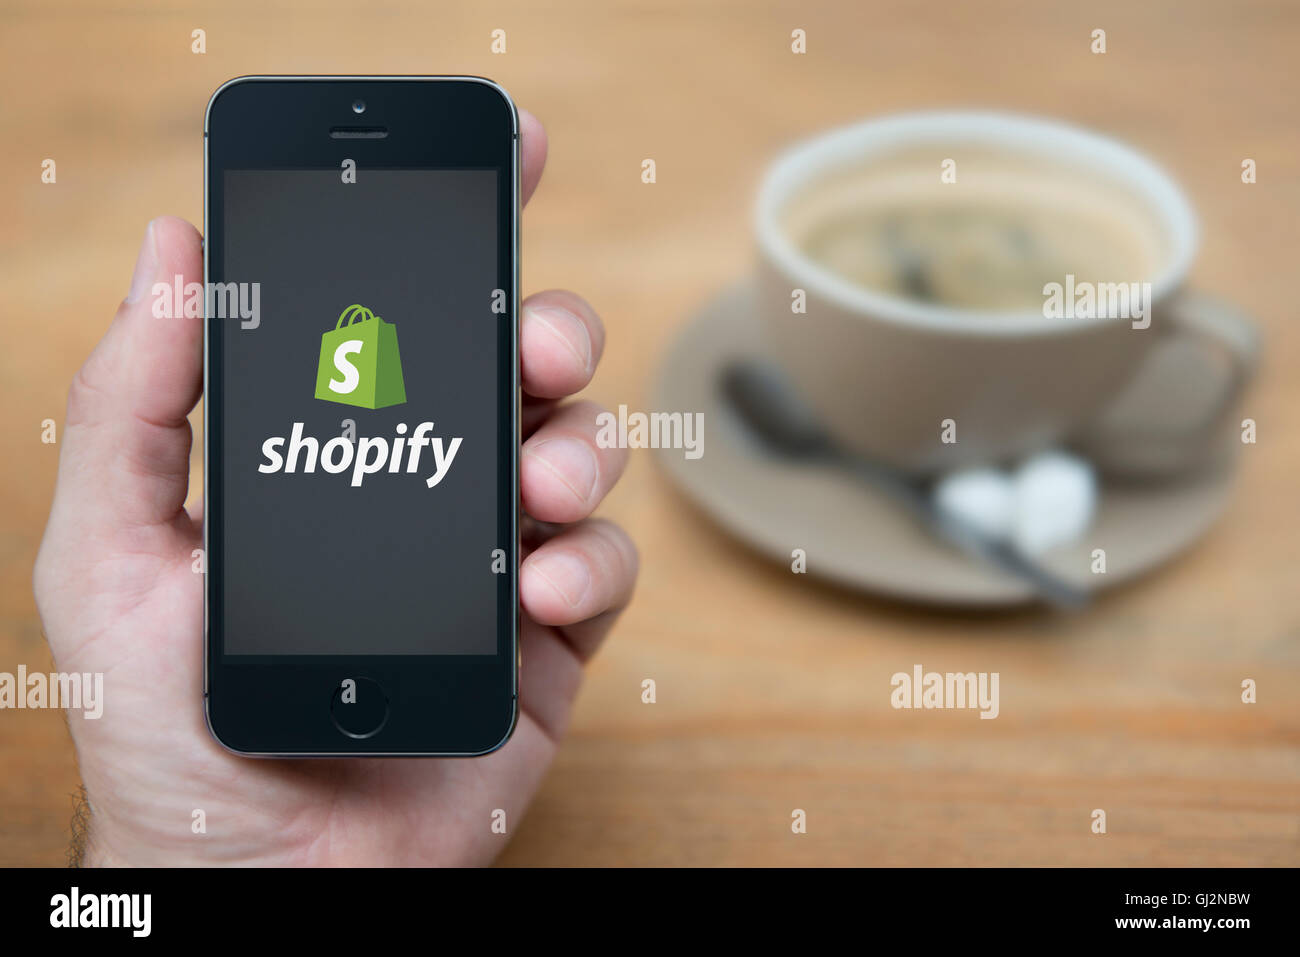 A man looks at his iPhone which displays the Shopify logo, while sat with a cup of coffee (Editorial use only). Stock Photo